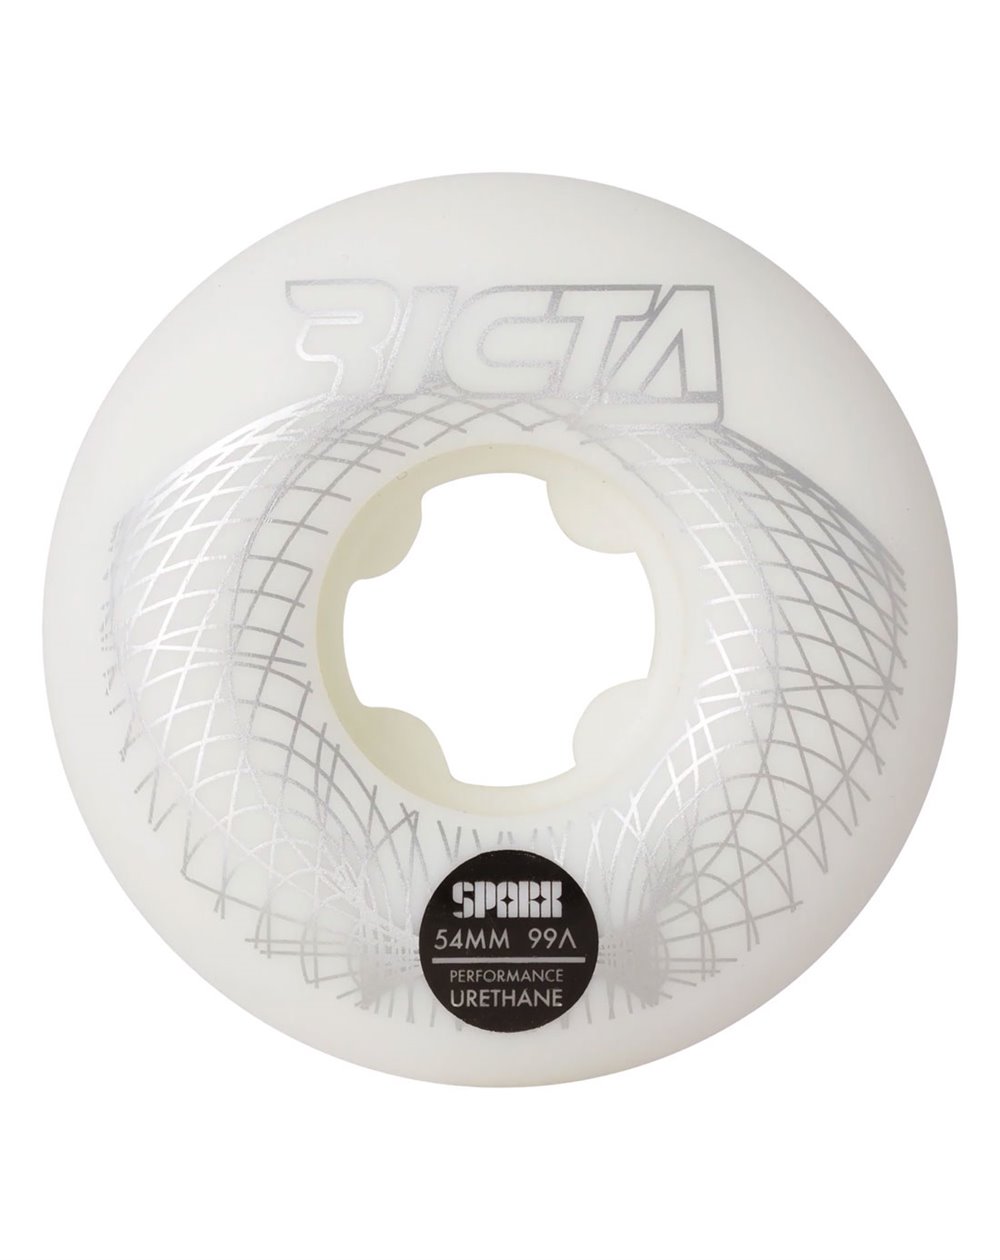 Ricta Sparx (Wireframe) 54mm 99A Skateboard Wheels pack of 4